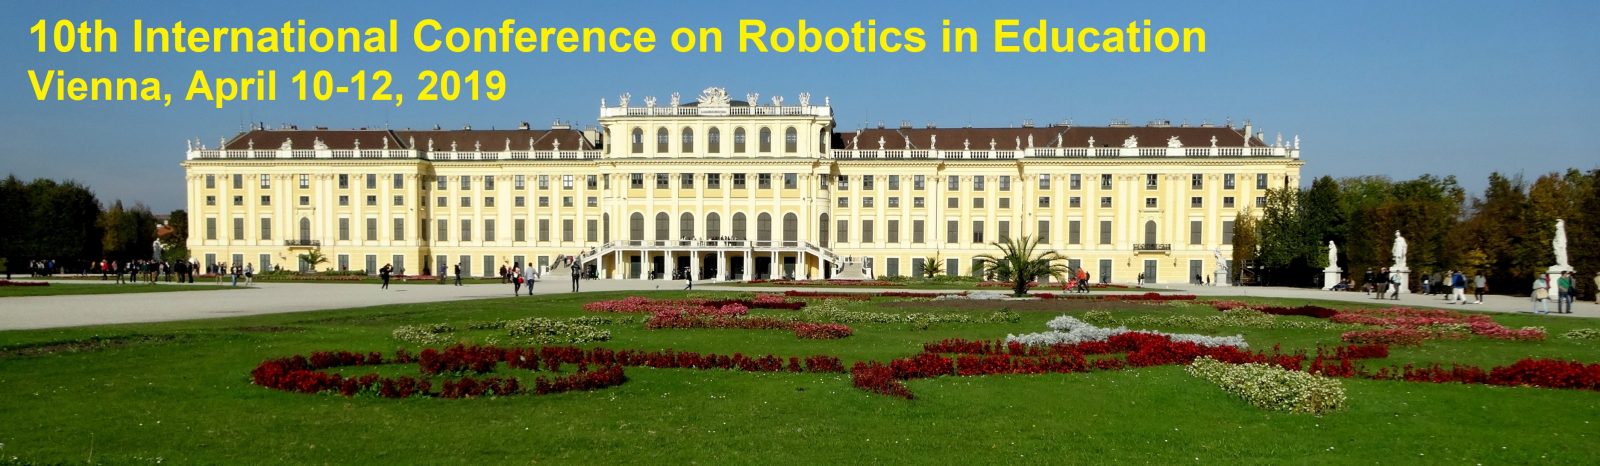 10th International Conference on Robotics in Education (RiE)